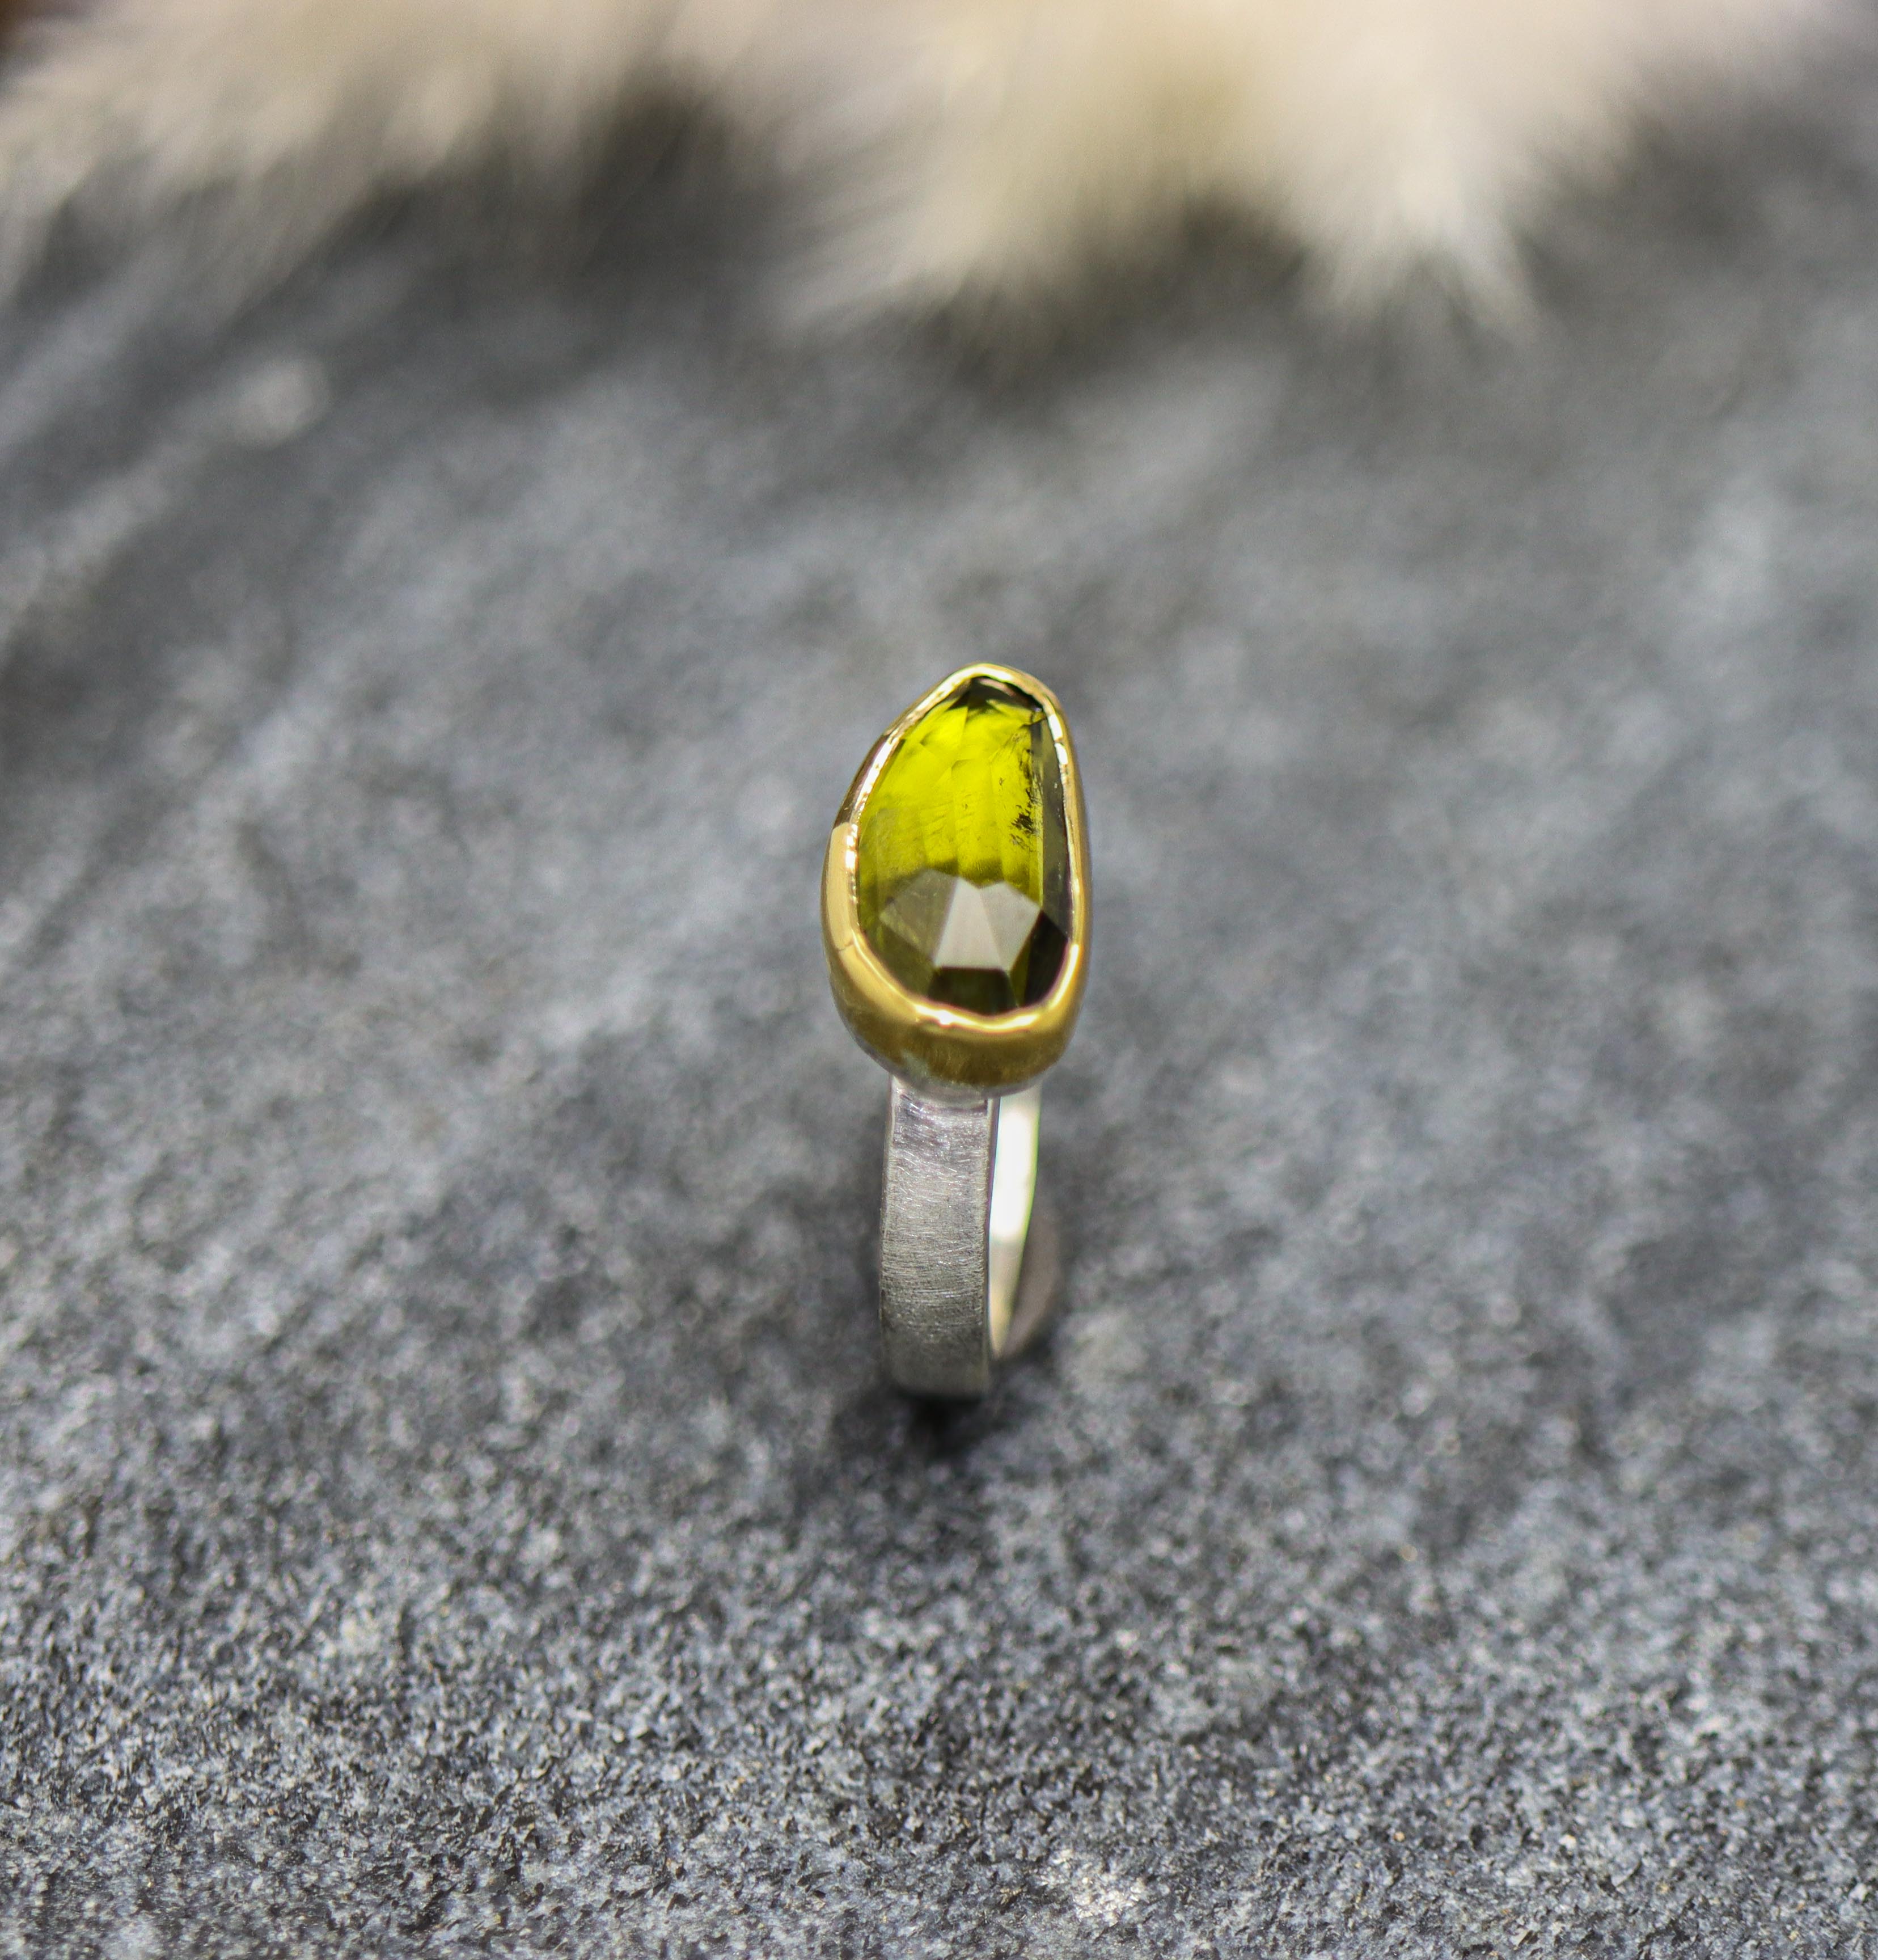 Green Tourmaline Sterling Silver and 22k Gold Ring Size 7.25